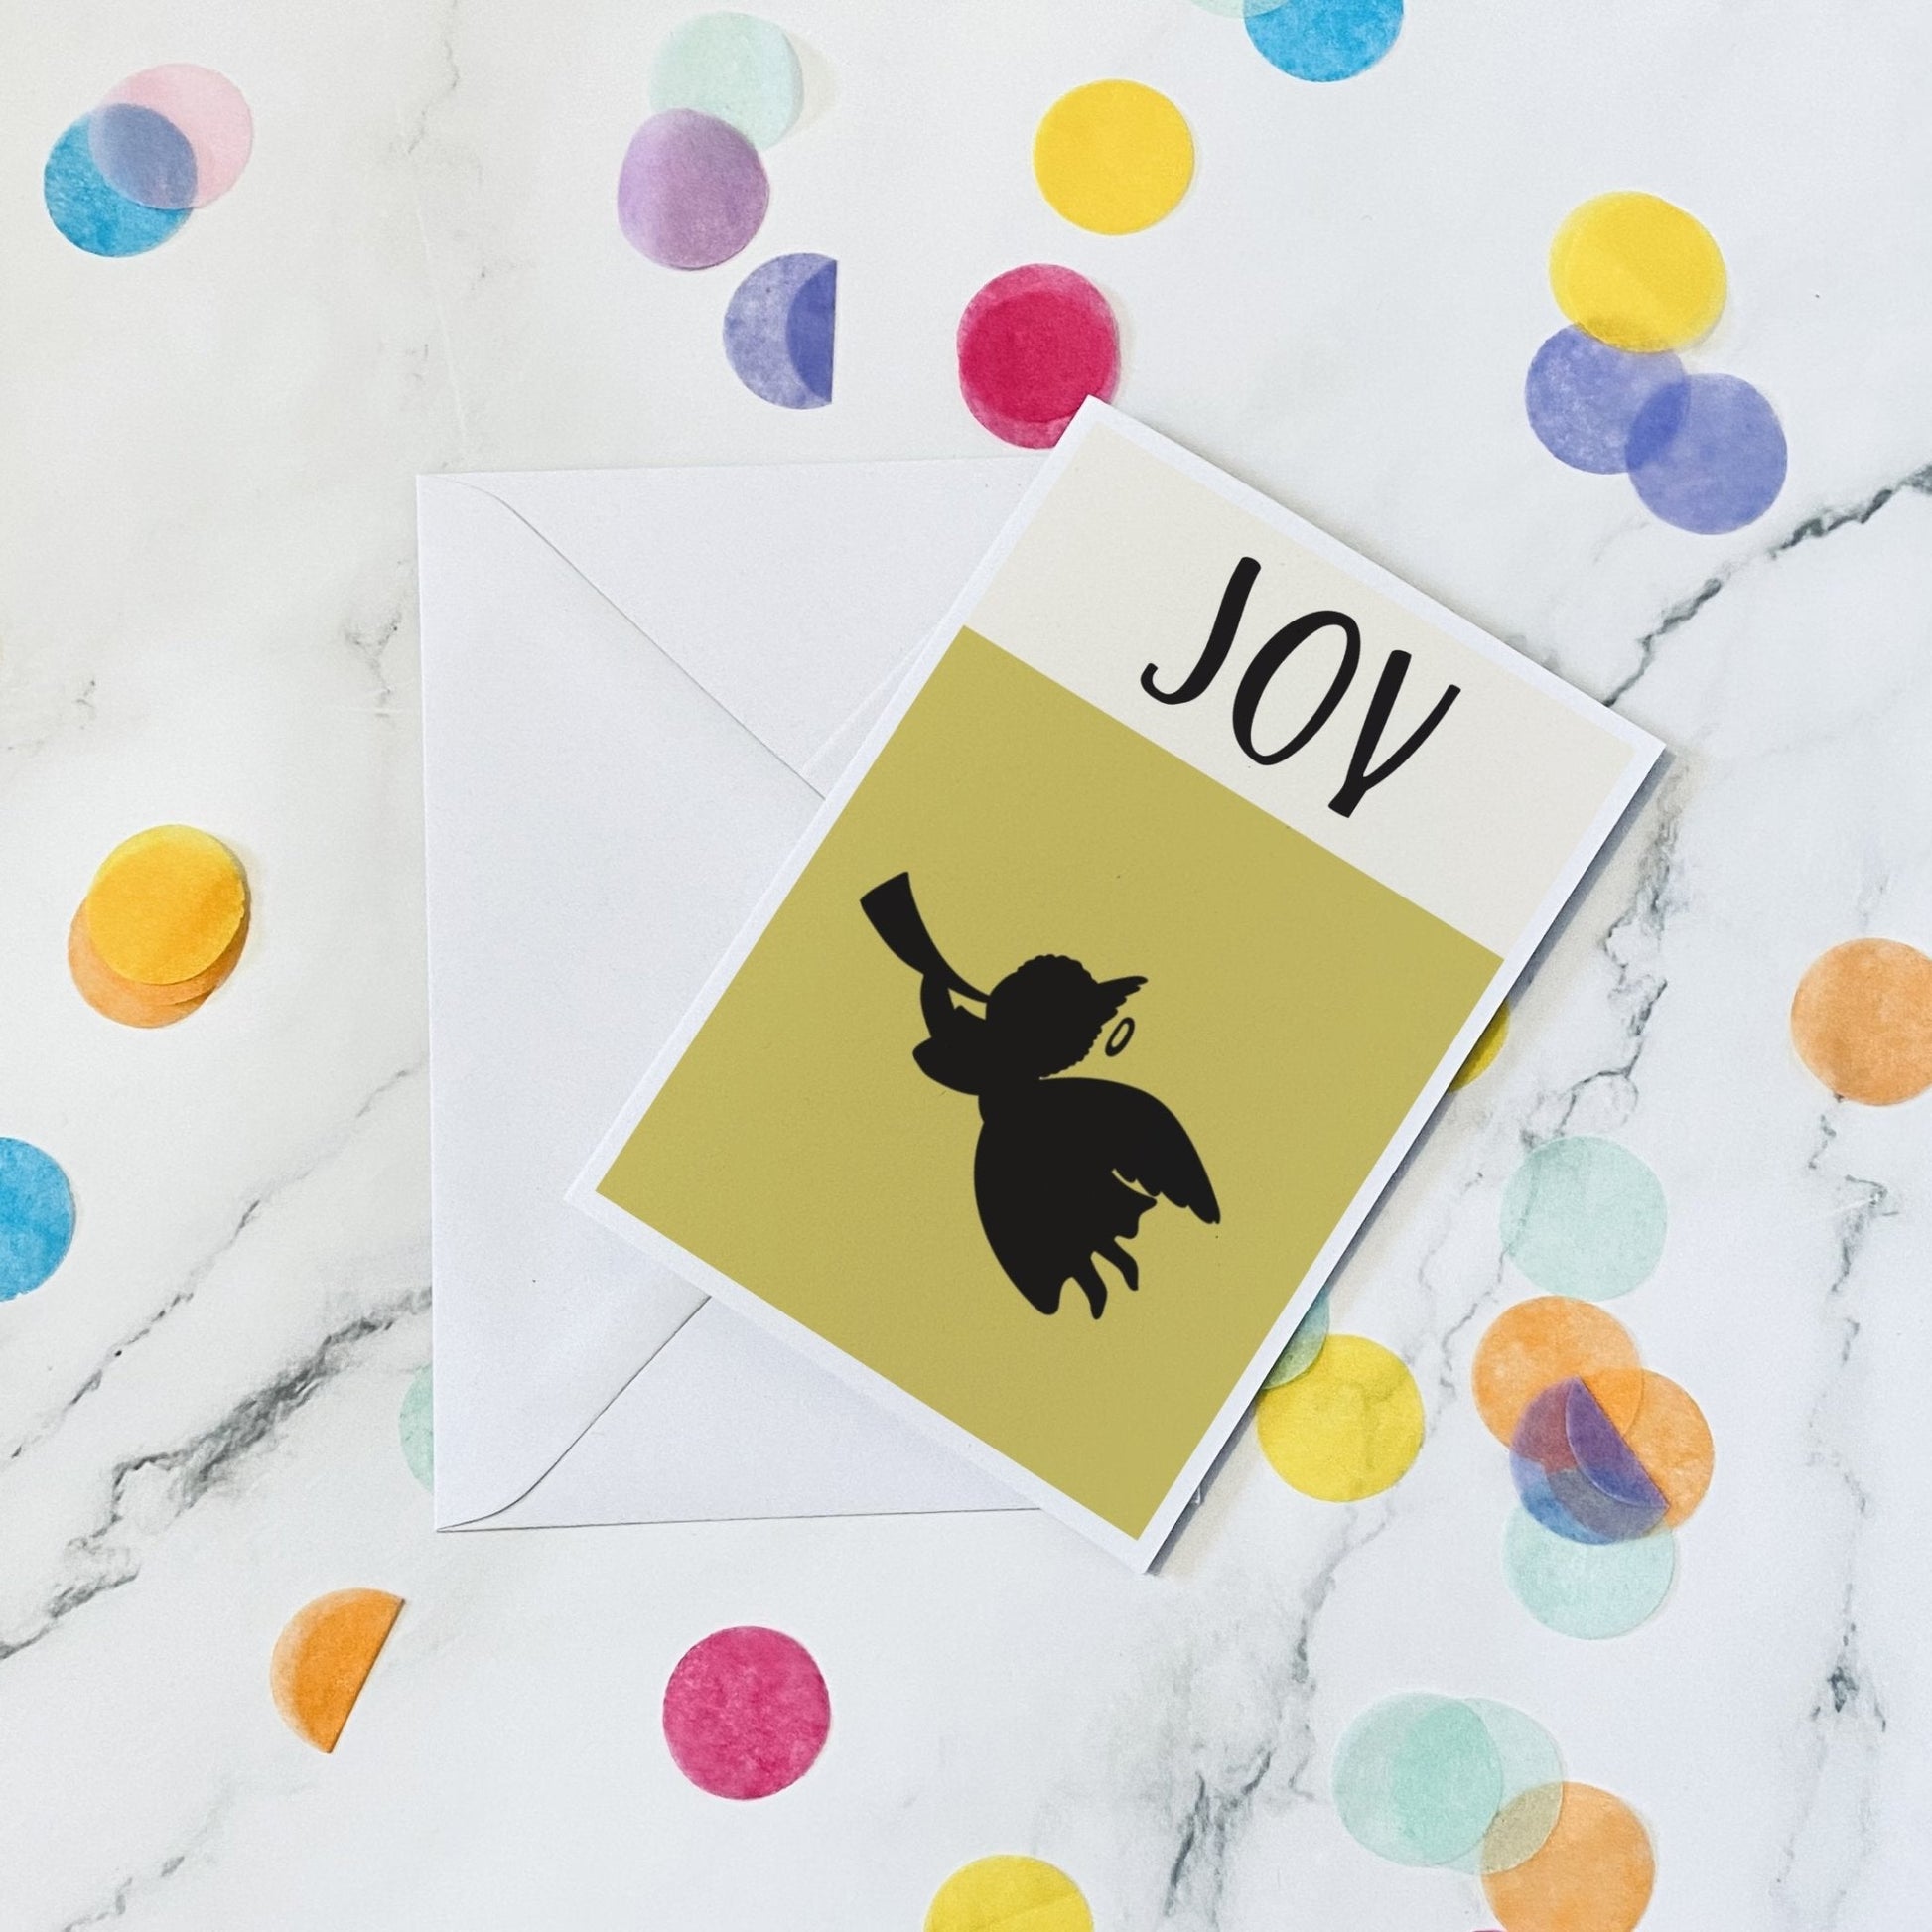 Joy Nativity scene christmas card - Dolly and Fred Designs